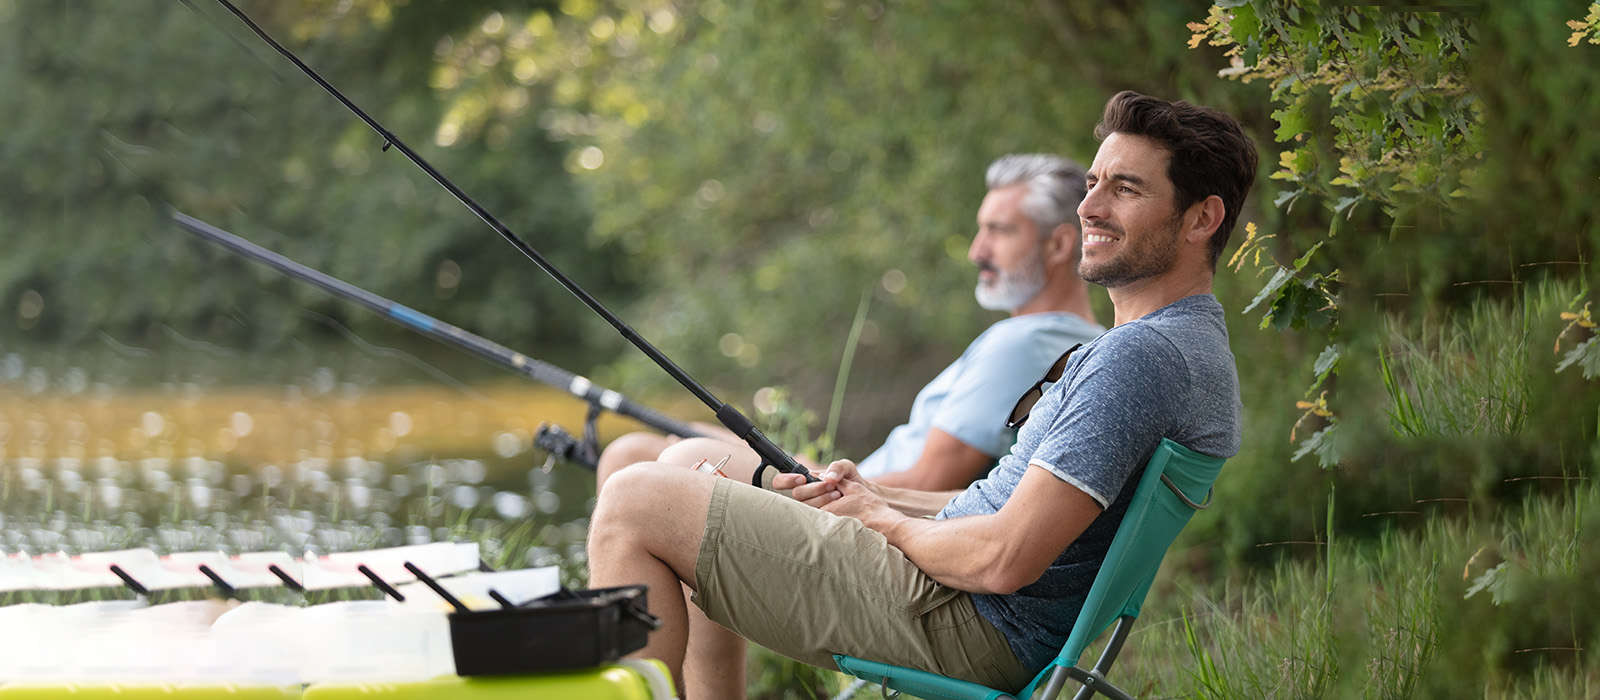 Two men sitting in folding chairs on a riverbank, one holding a fishing rod, with a body of water and lush greenery in the background.